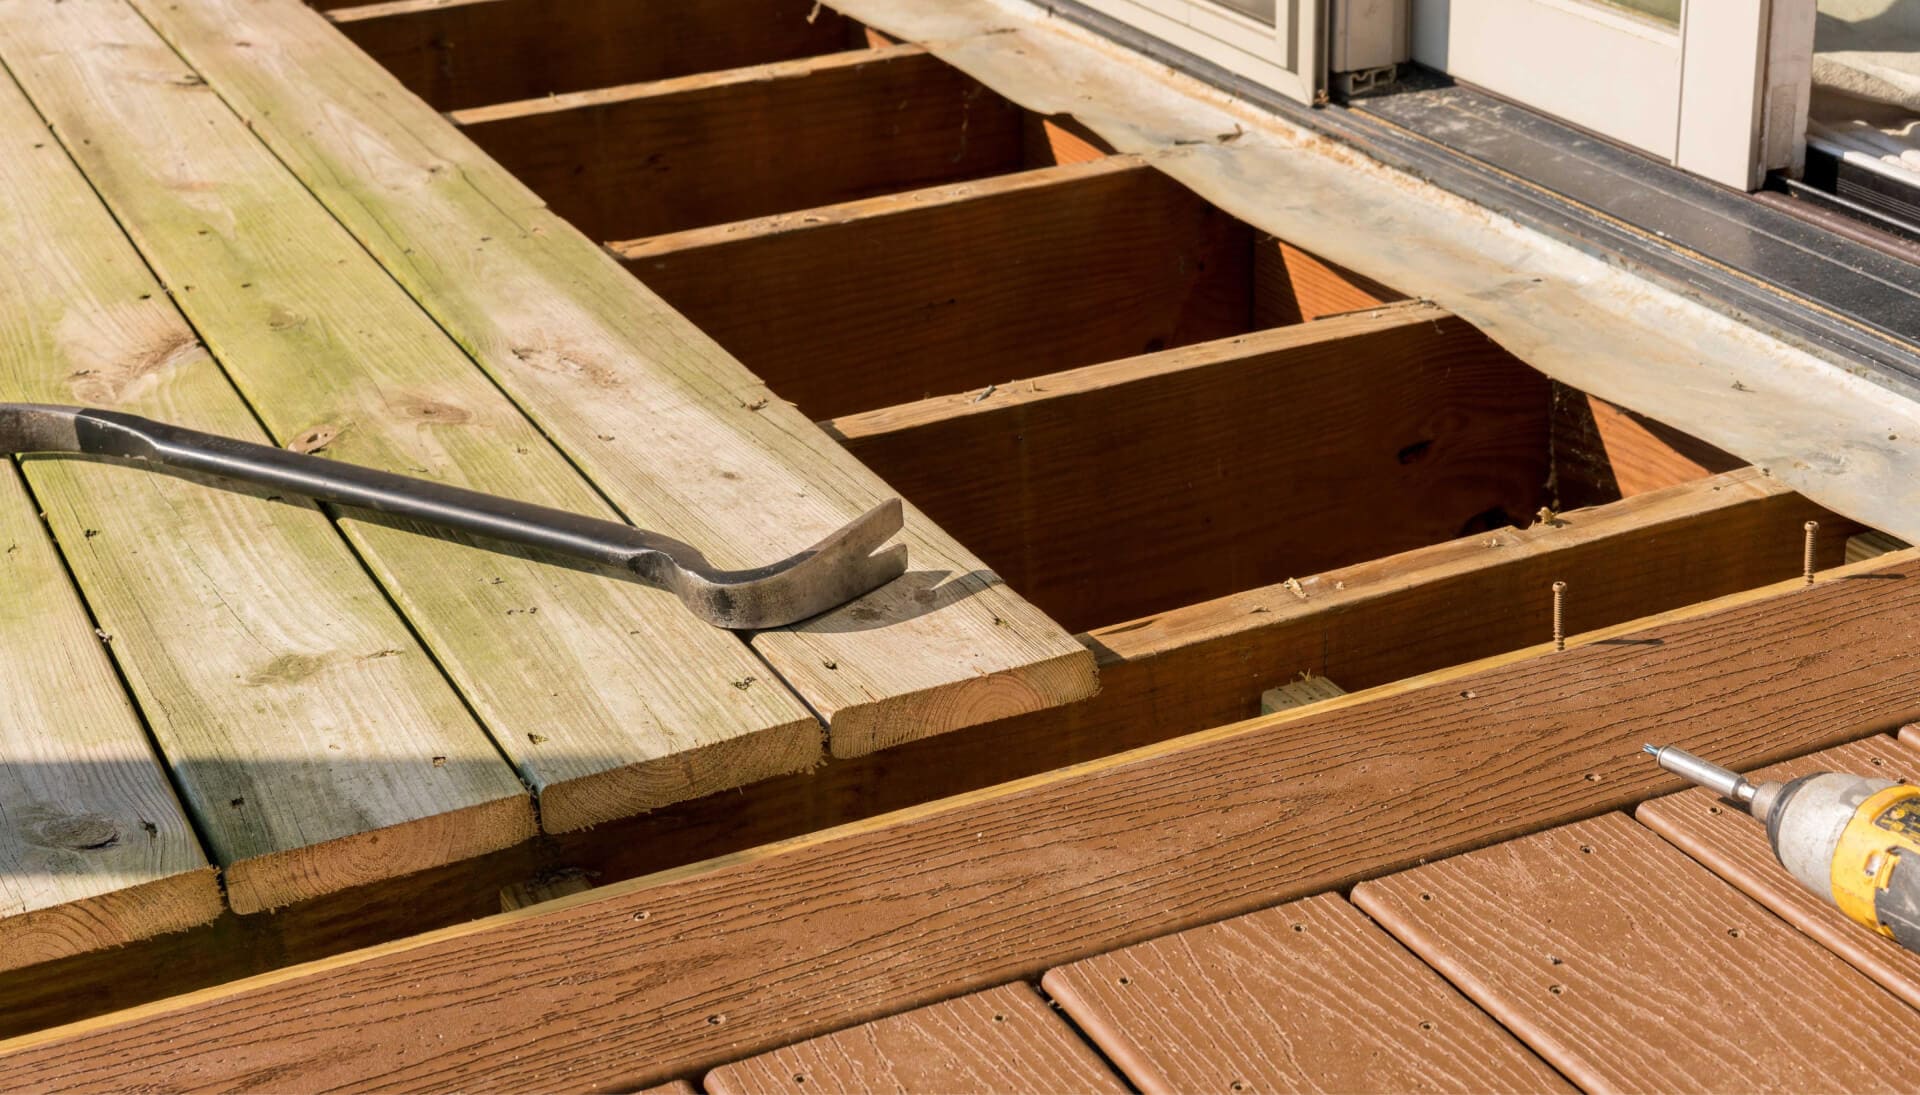 We offer the best deck repair services in Bel Air, MD